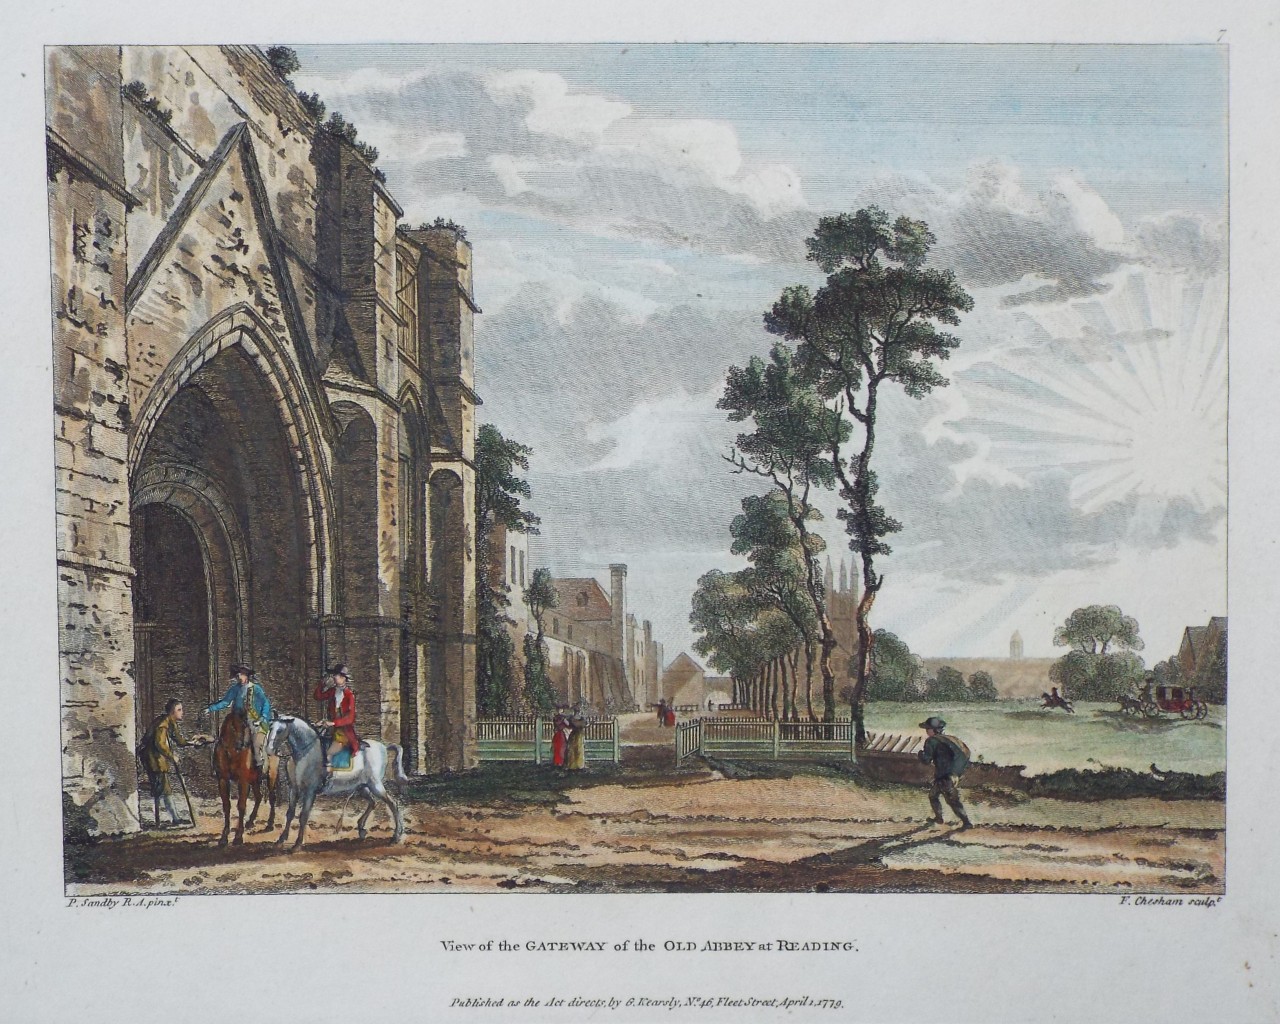 Print - View of the Gateway of the Old Abbey at Reading. - Chesham